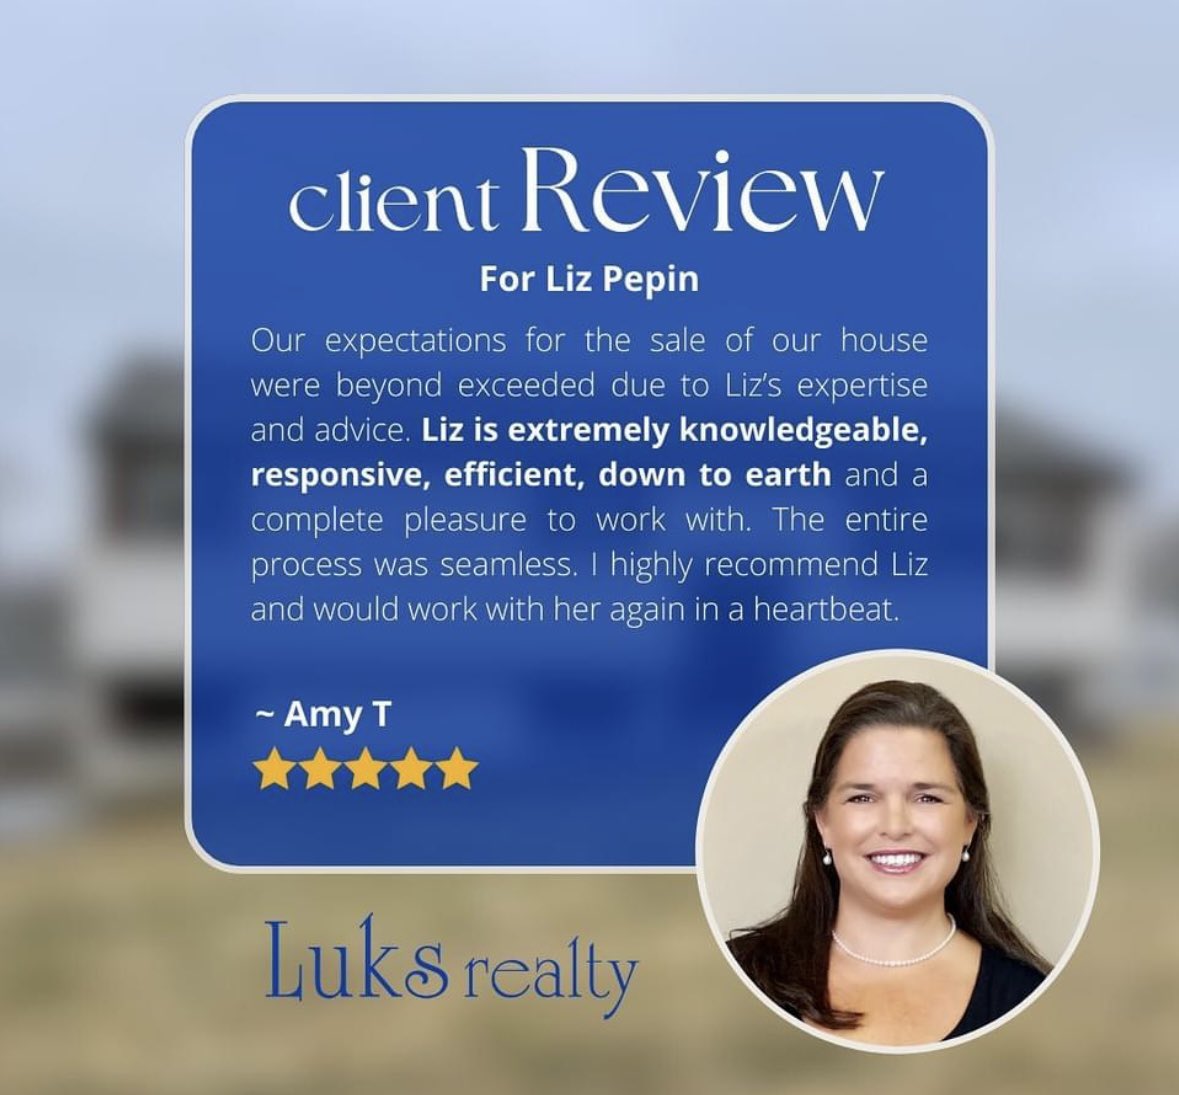 Knowledgeable… Responsive…
Efficient… Down to Earth…
These are just some of the adjectives clients are using to describe Liz. 
In need of a Realtor? 
lizpepinrealestate.com
#luksrealty 
#ctrealestate #ctrealestateagent 
#newfairfieldct #shermanct #danburyct